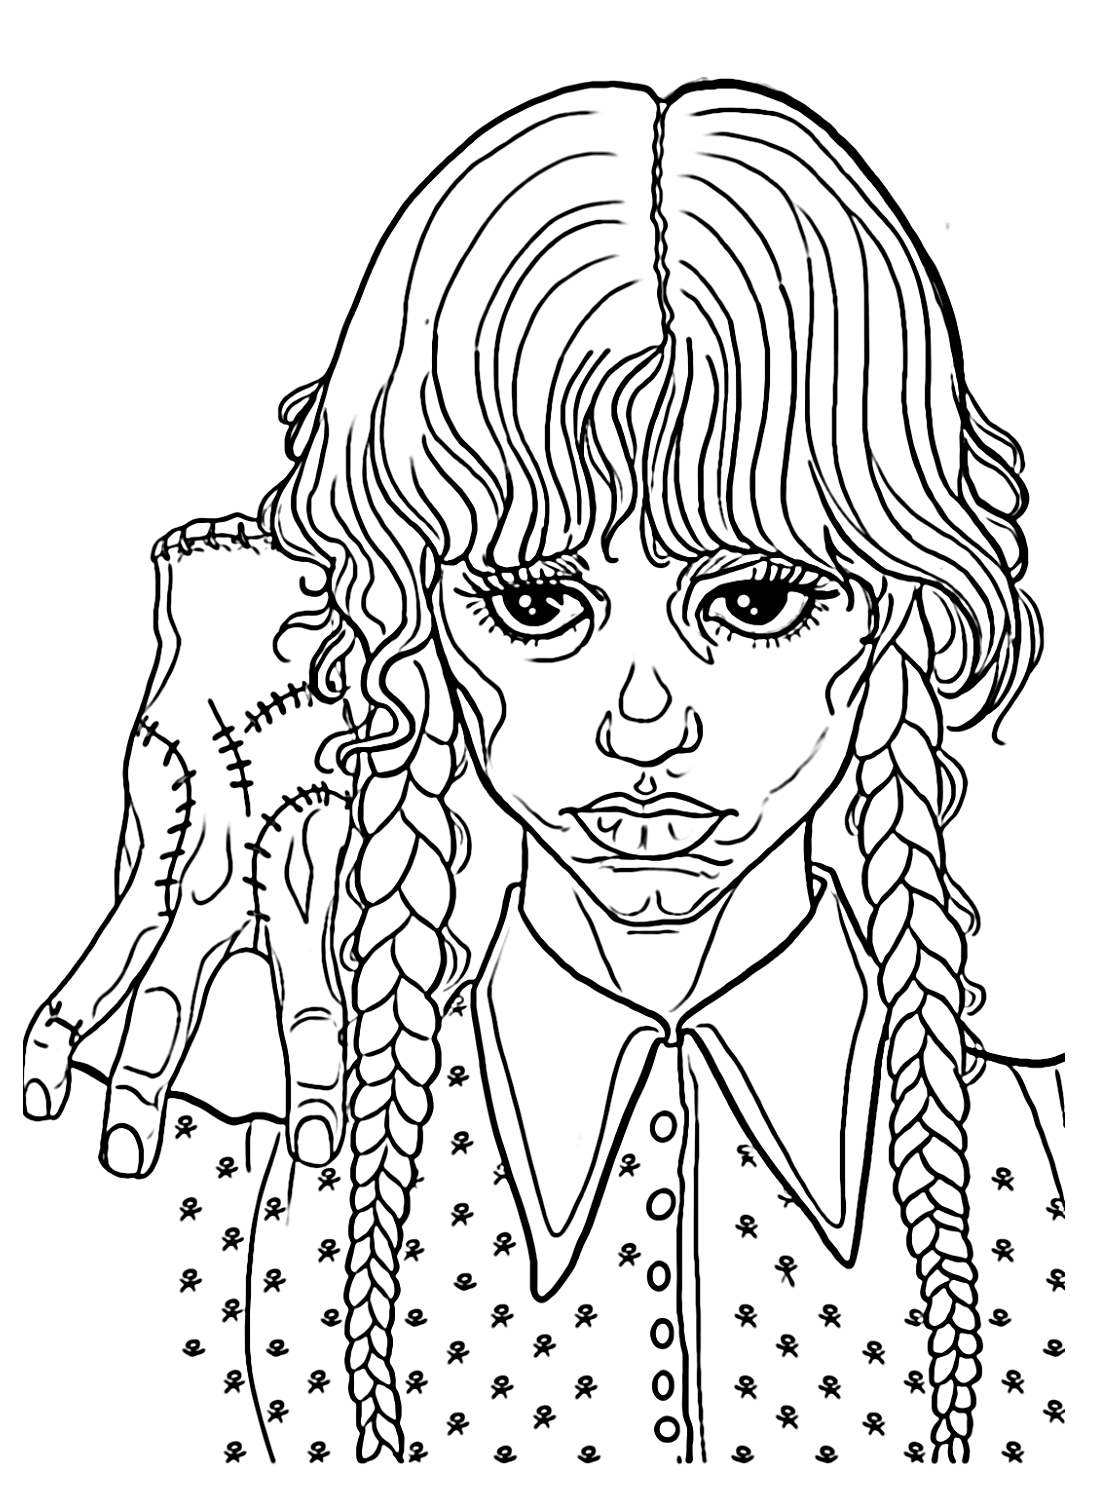 Wednesday coloring pages printable for free download